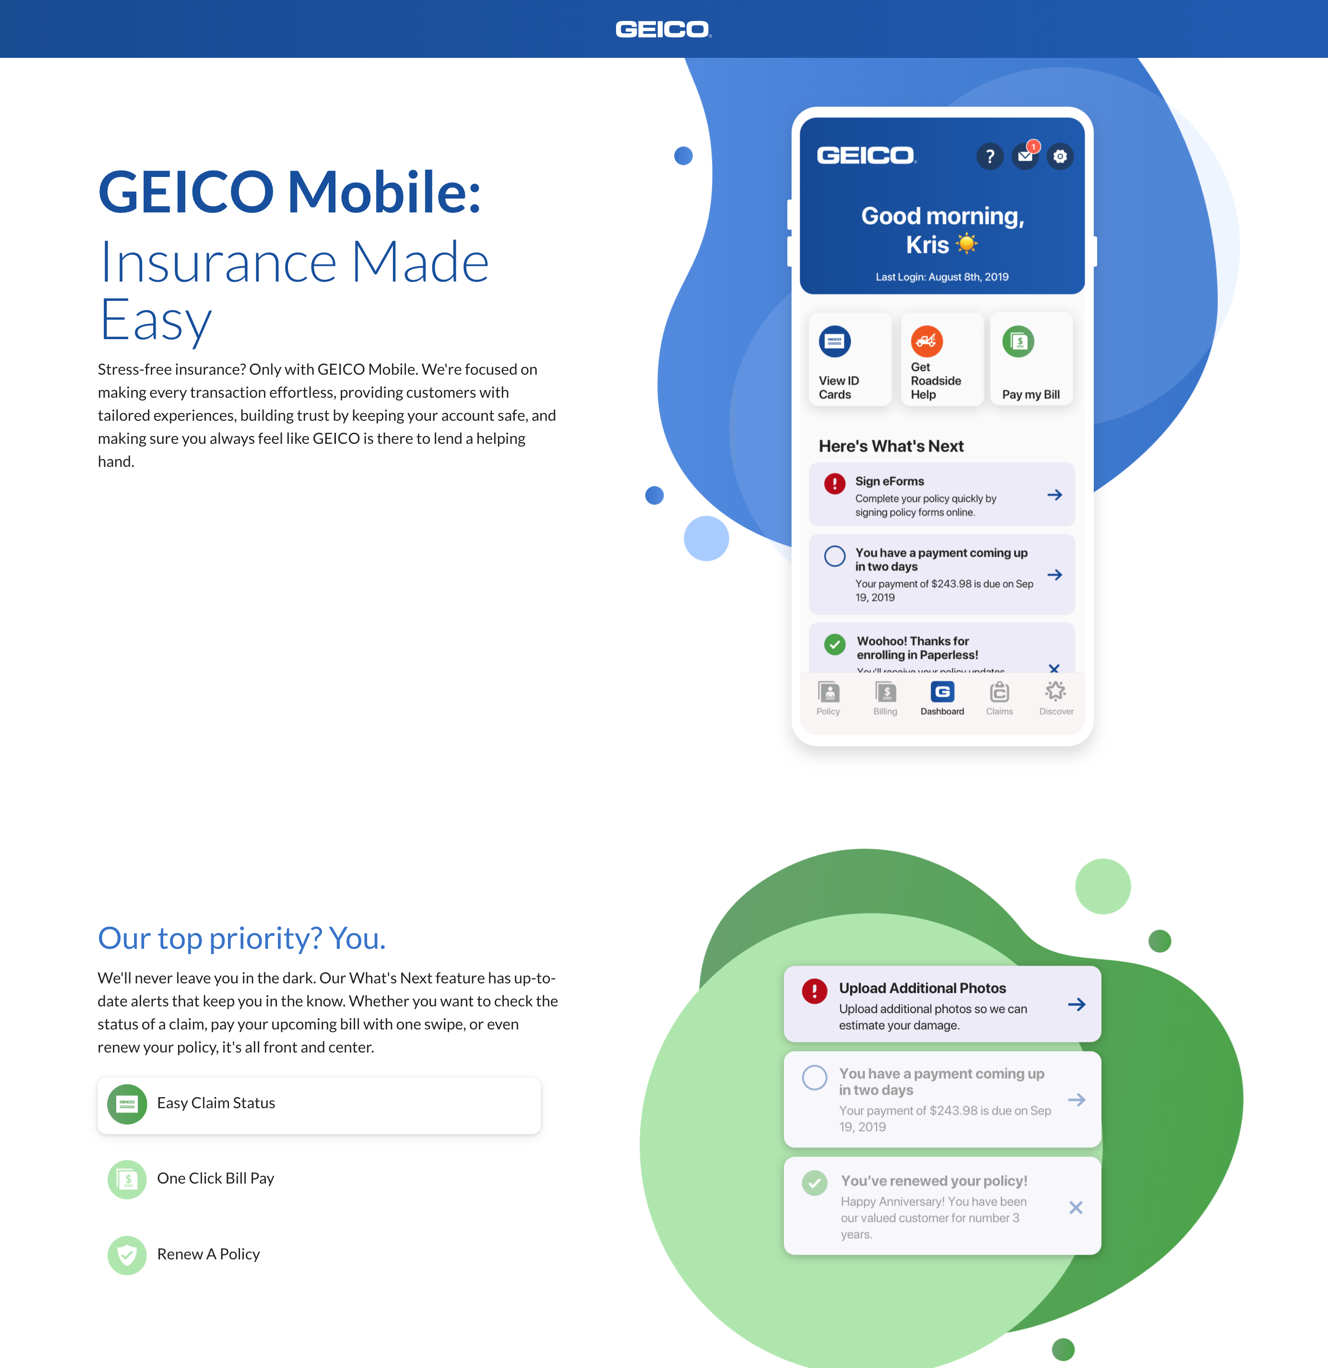 GEICO Mobile: Insurance Made Easy image